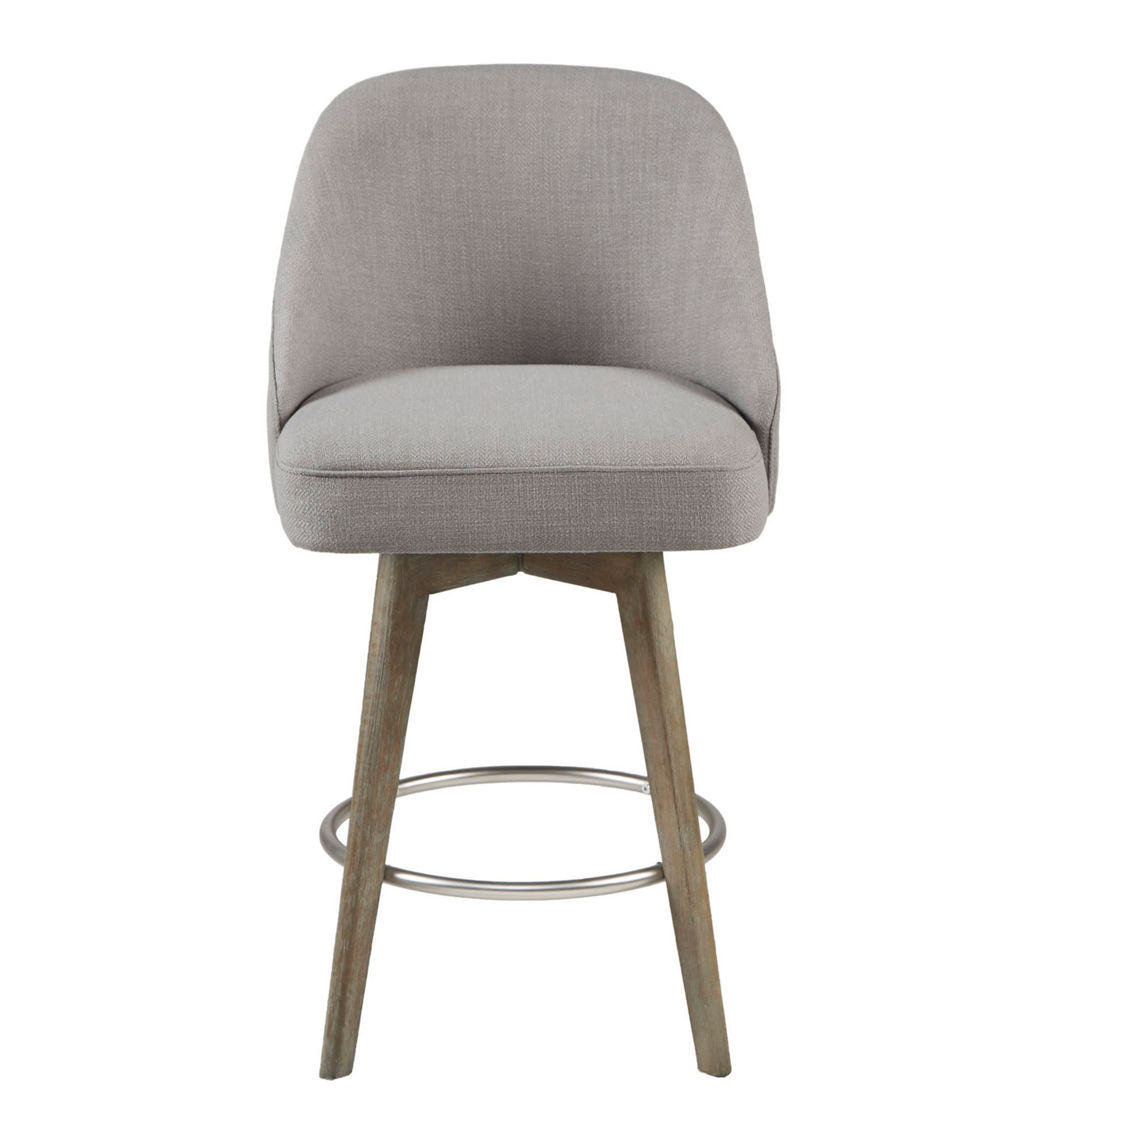 Madison Park Walsh Counter Stool with Swivel Seat - Image 3 of 5